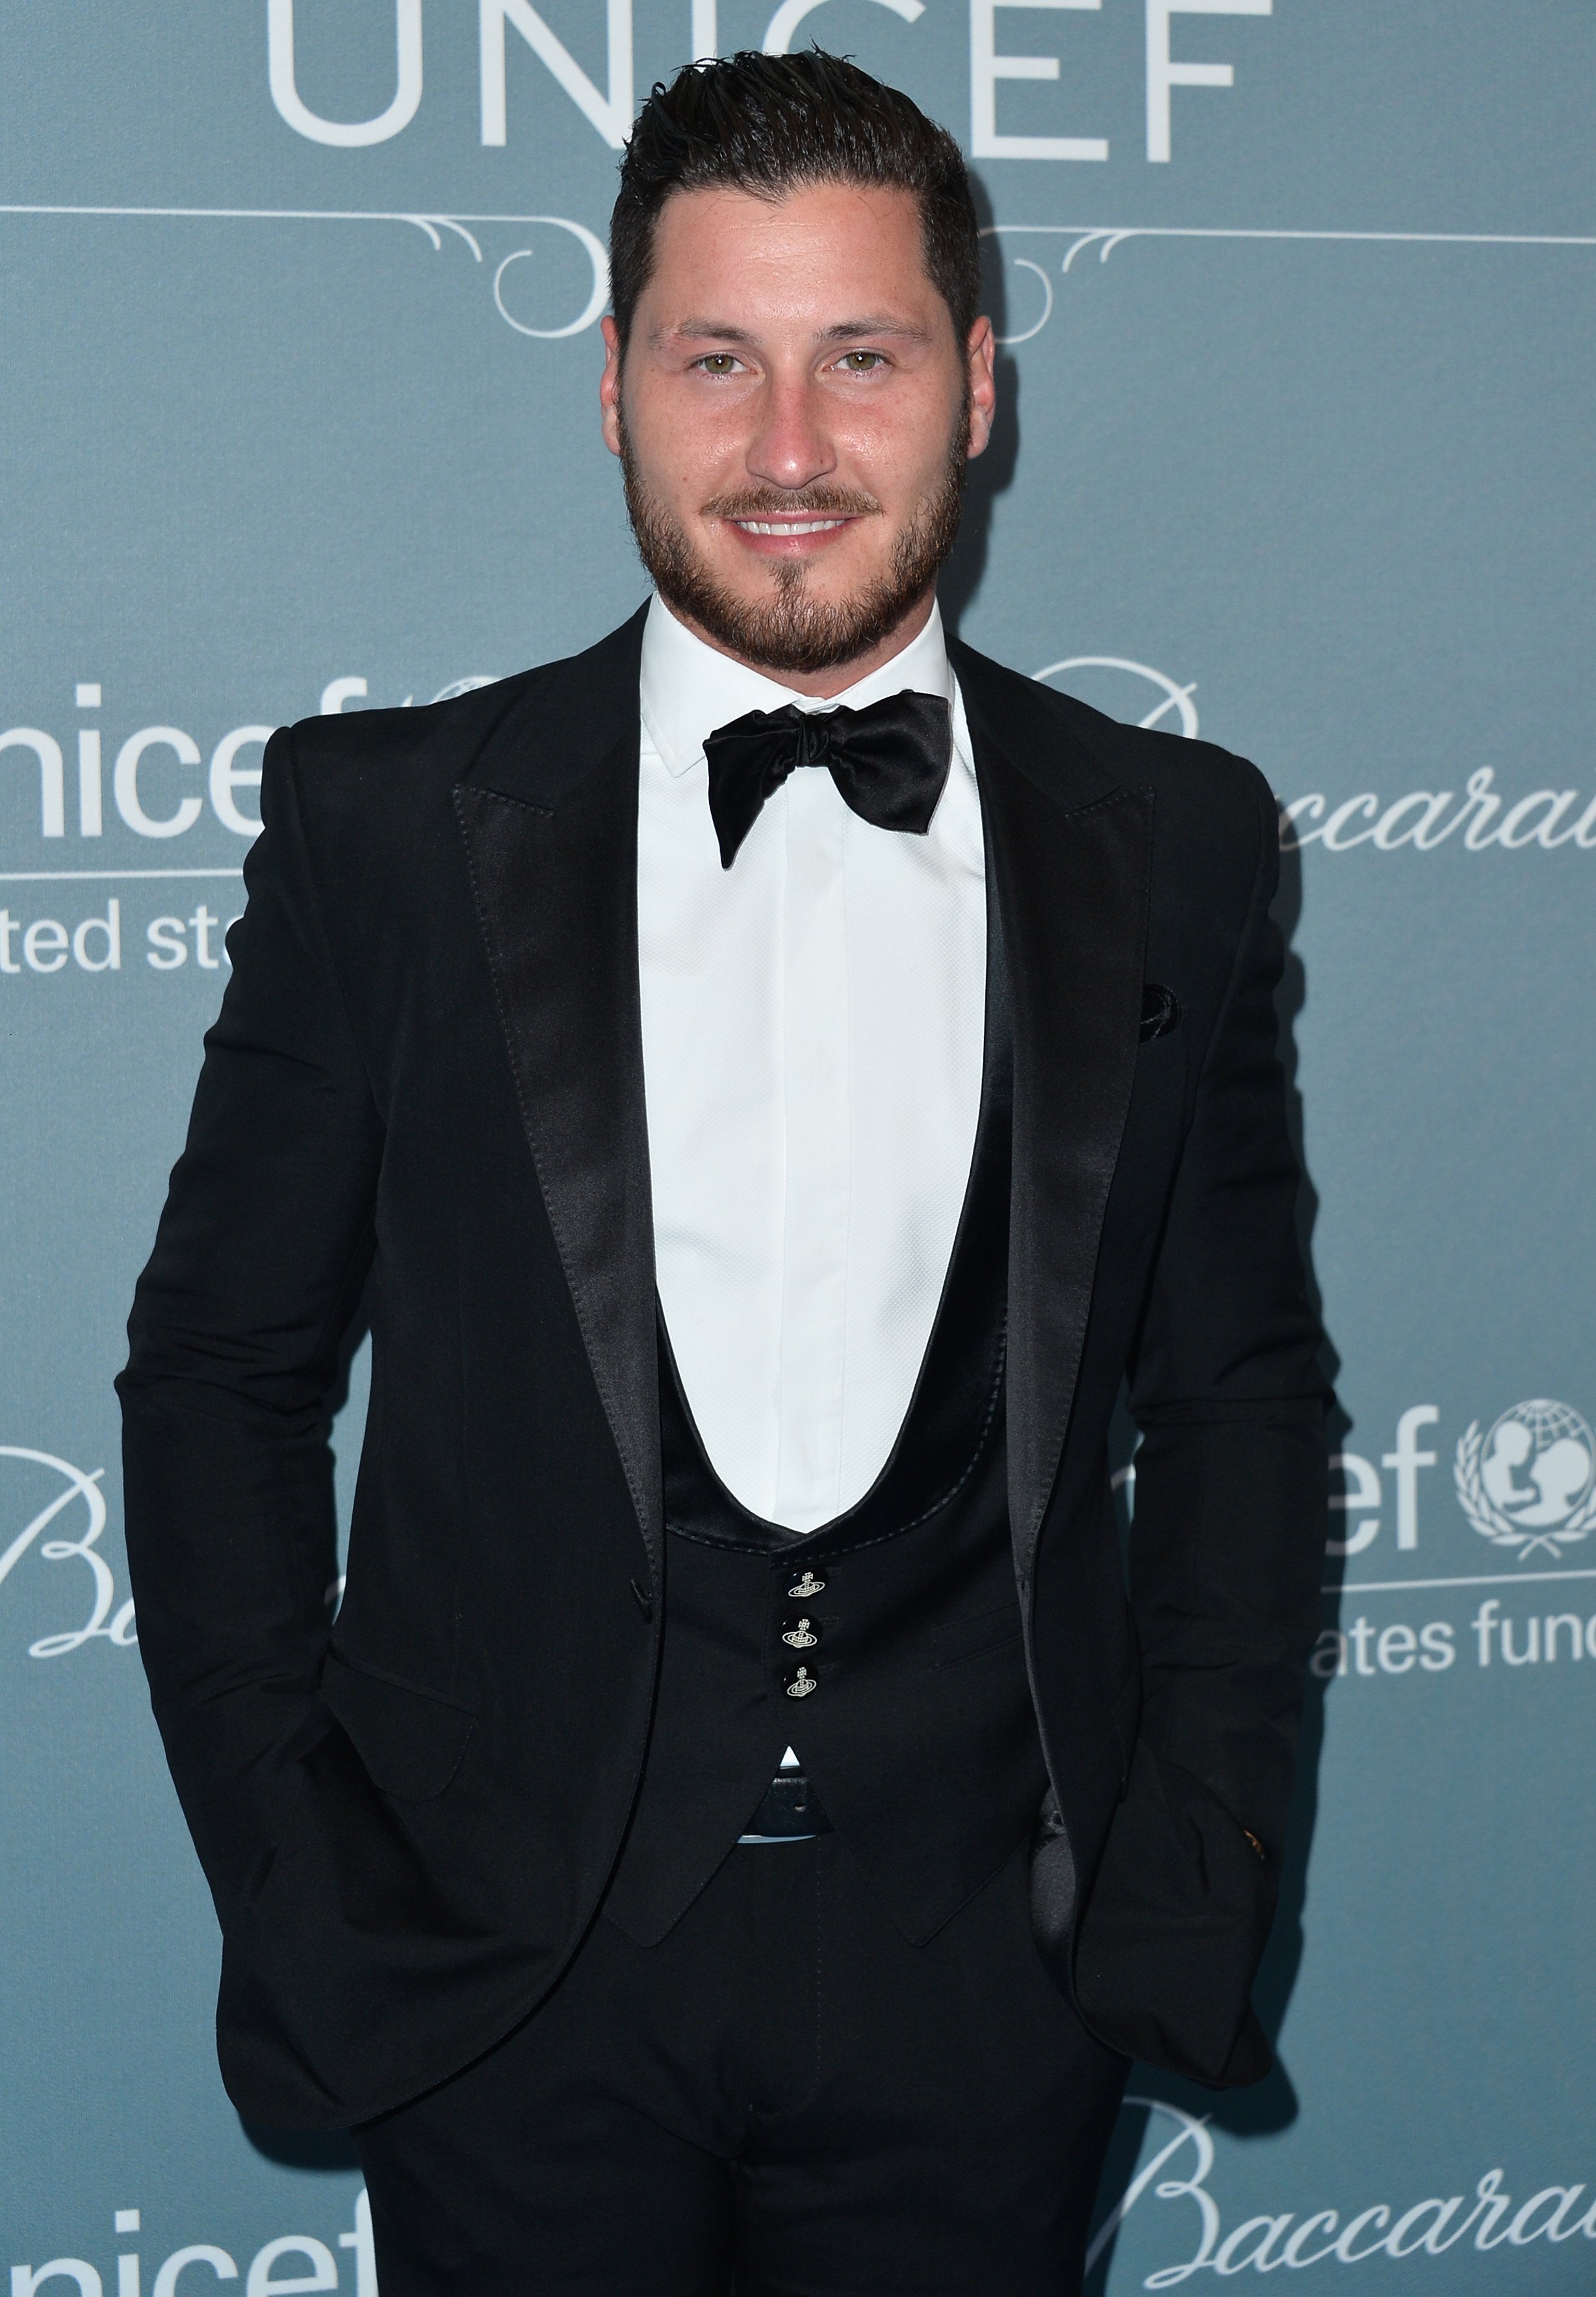  Val Chmerkovskiy arrives to the 2014 UNICEF Ball on January 14, 2014, in Beverly Hills, California. | Source: Getty Images.